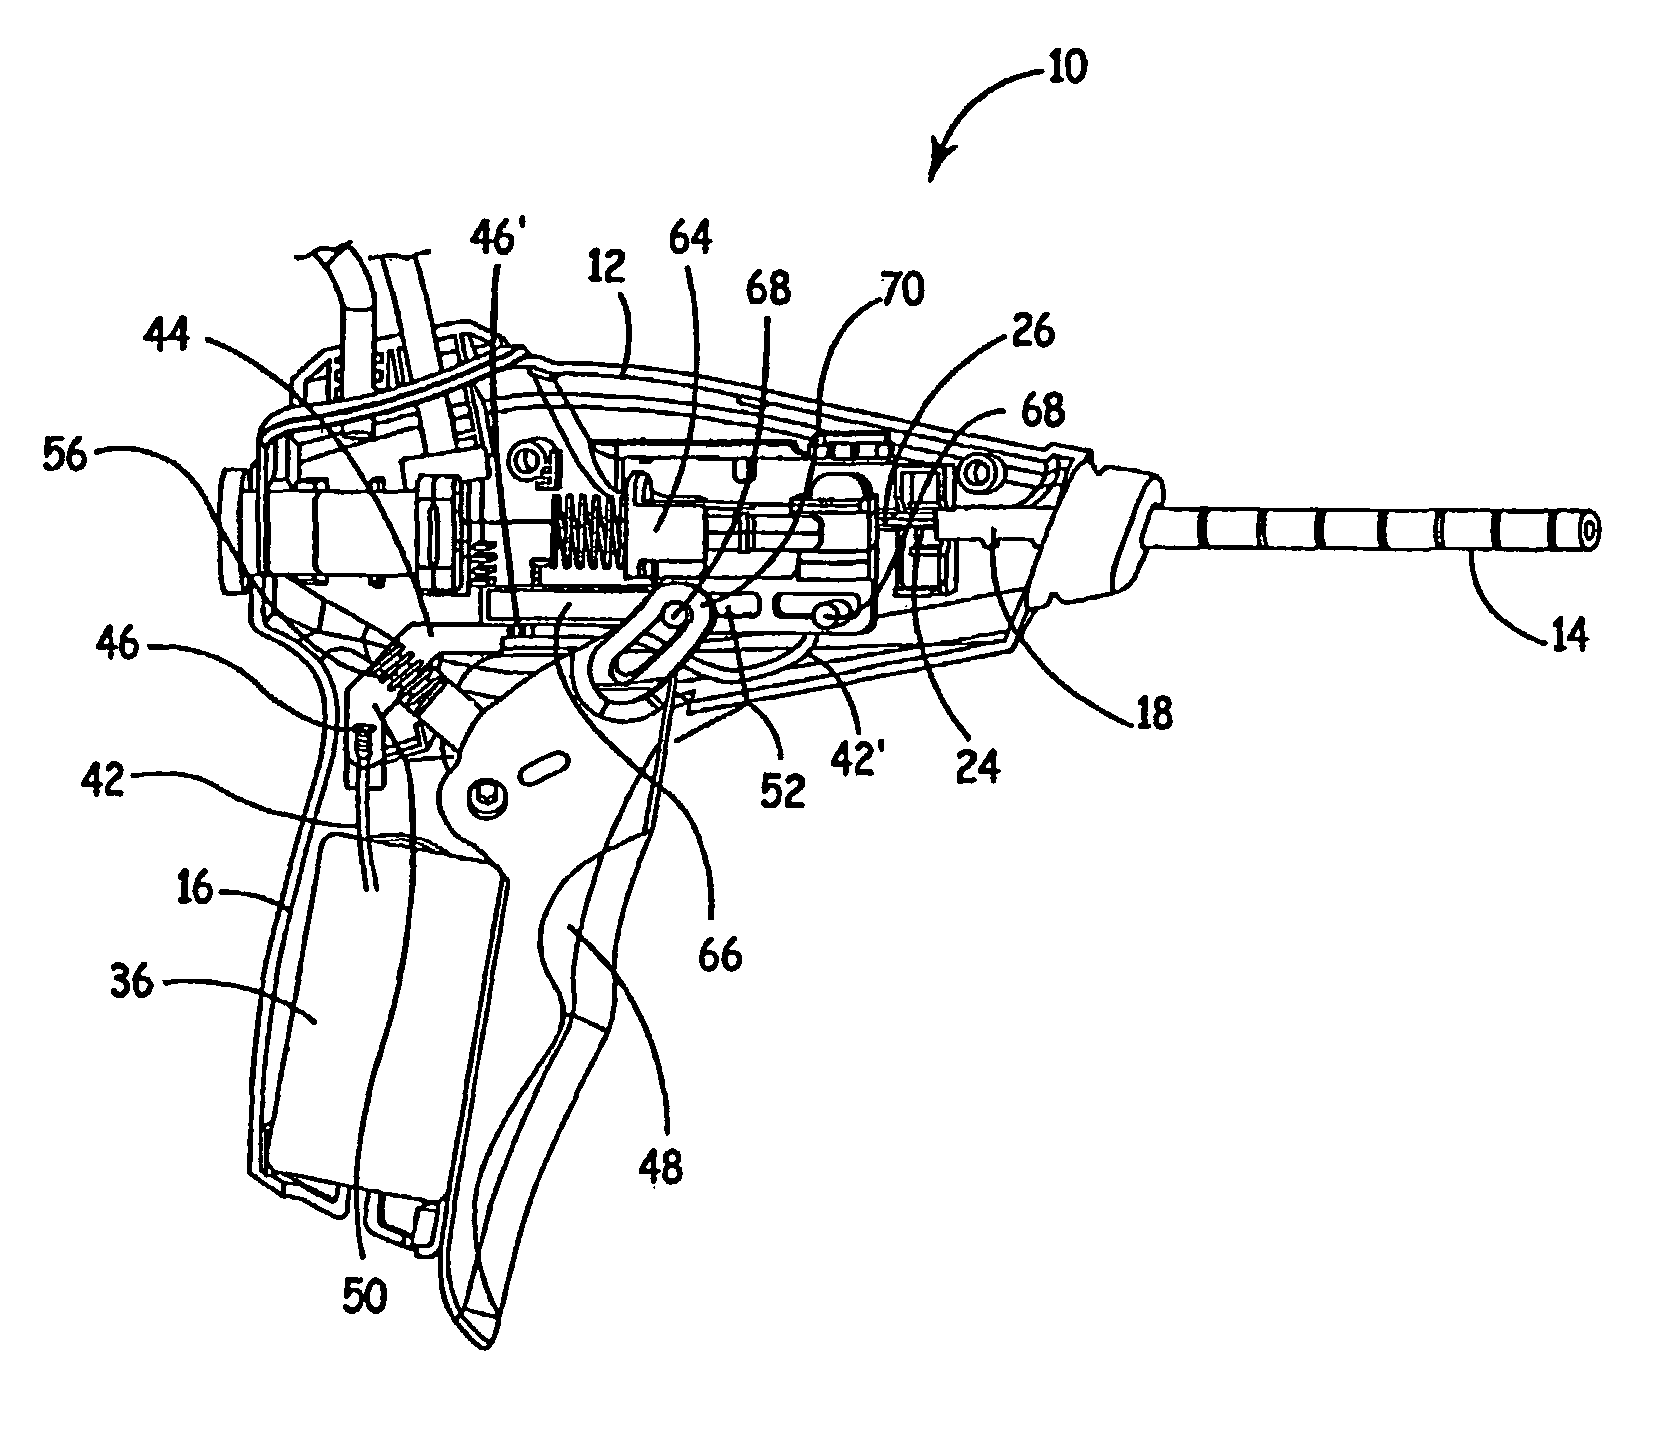 Tuna device with integrated saline reservoir